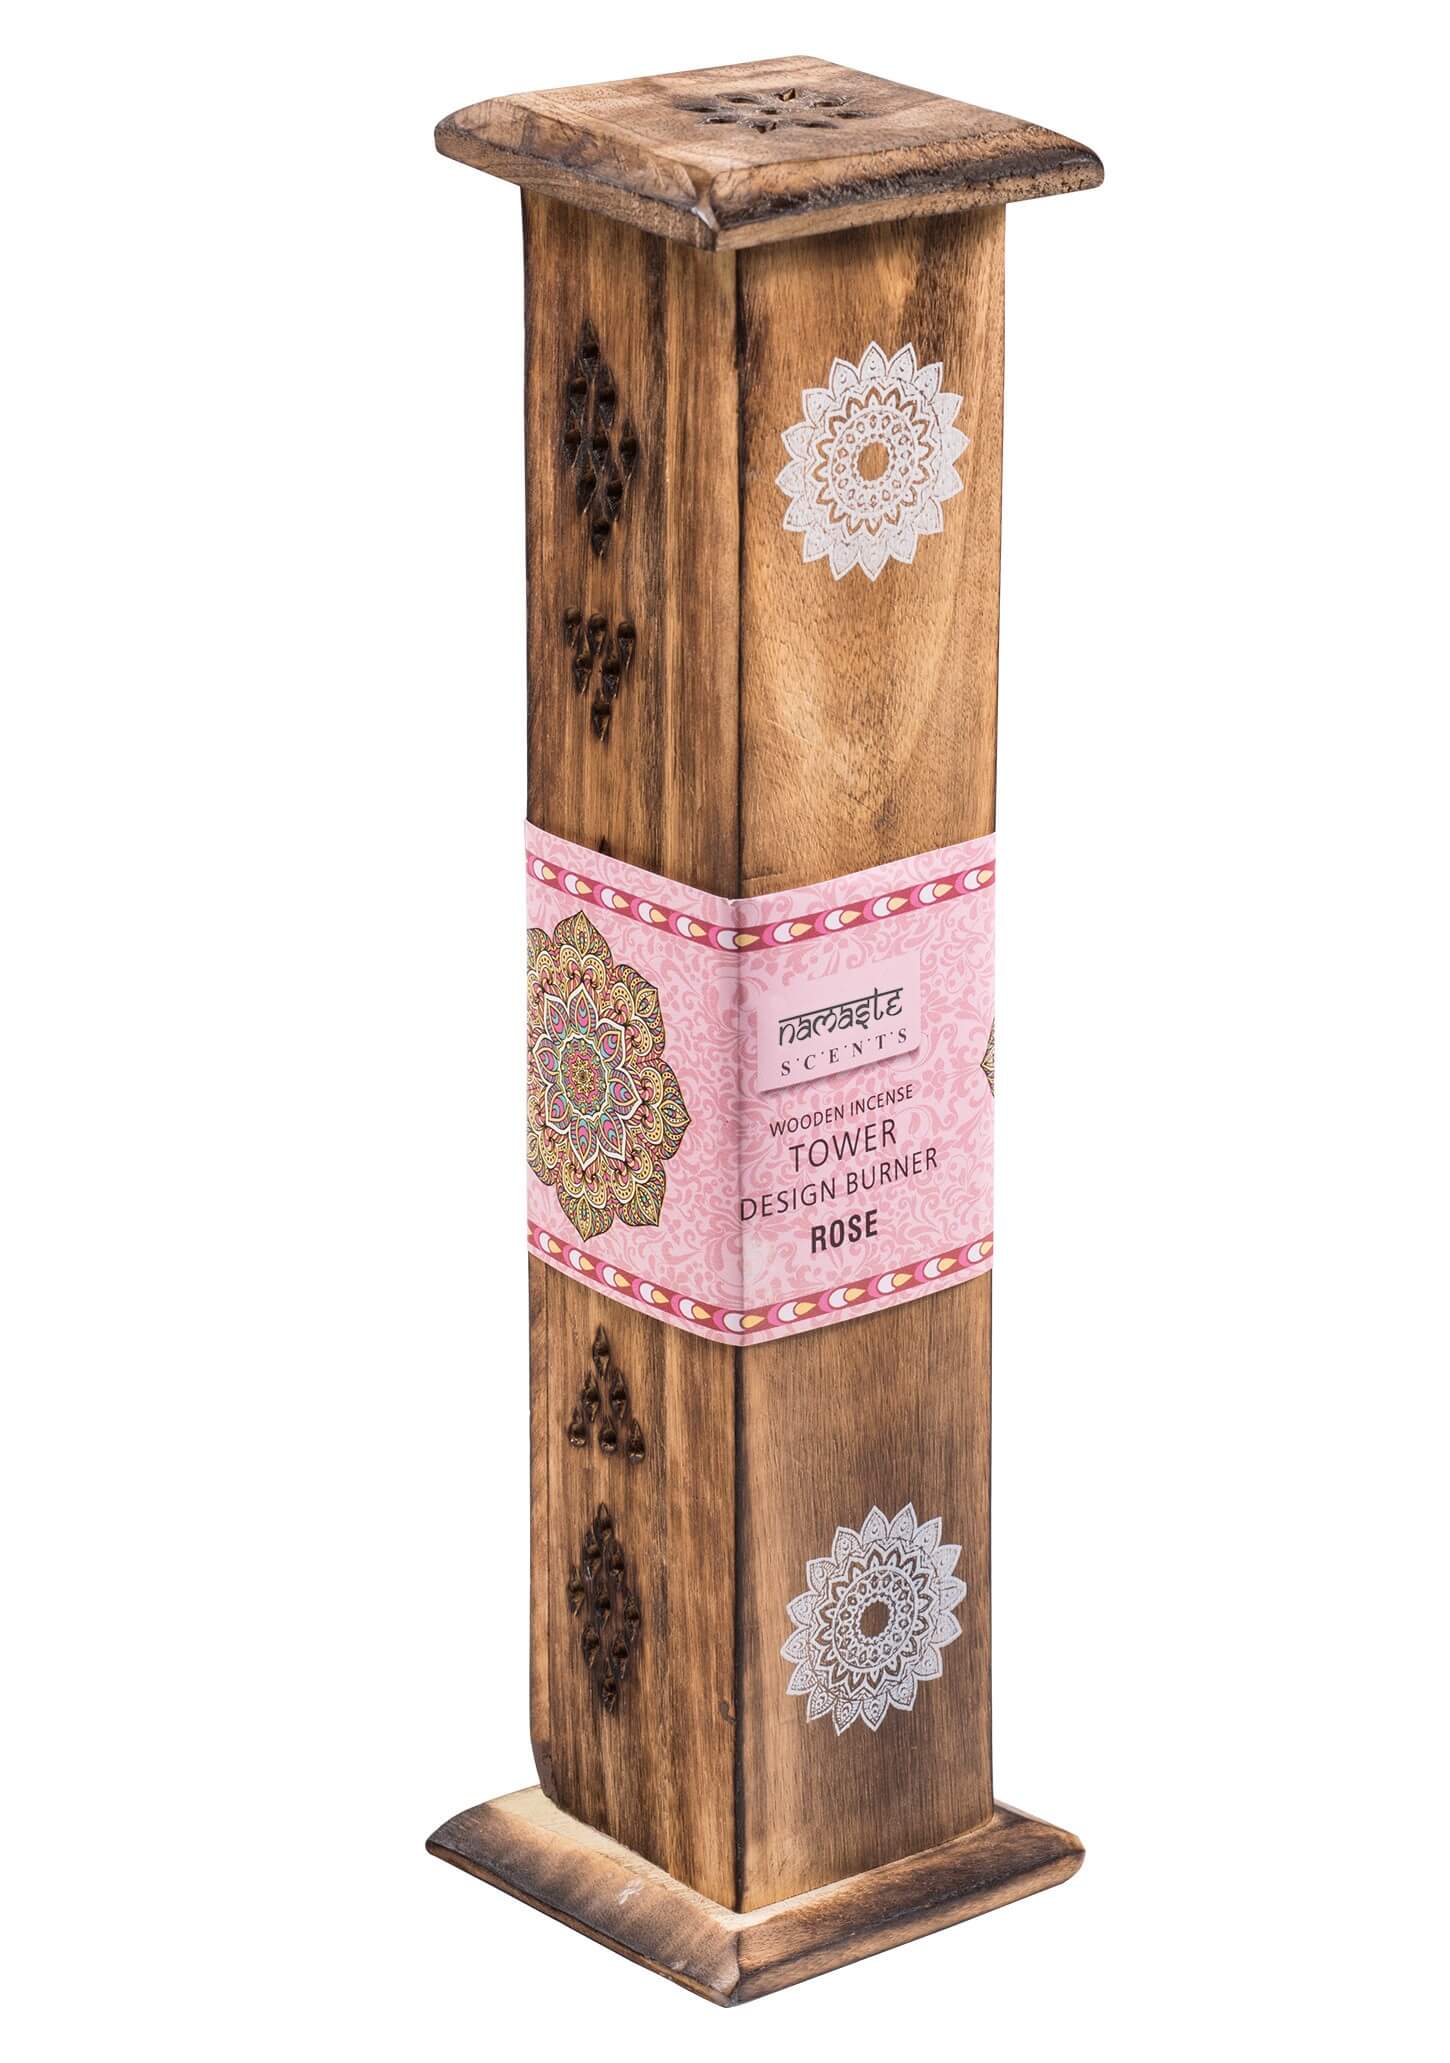 Mango Wood Incense Tower (with Incense) - rose